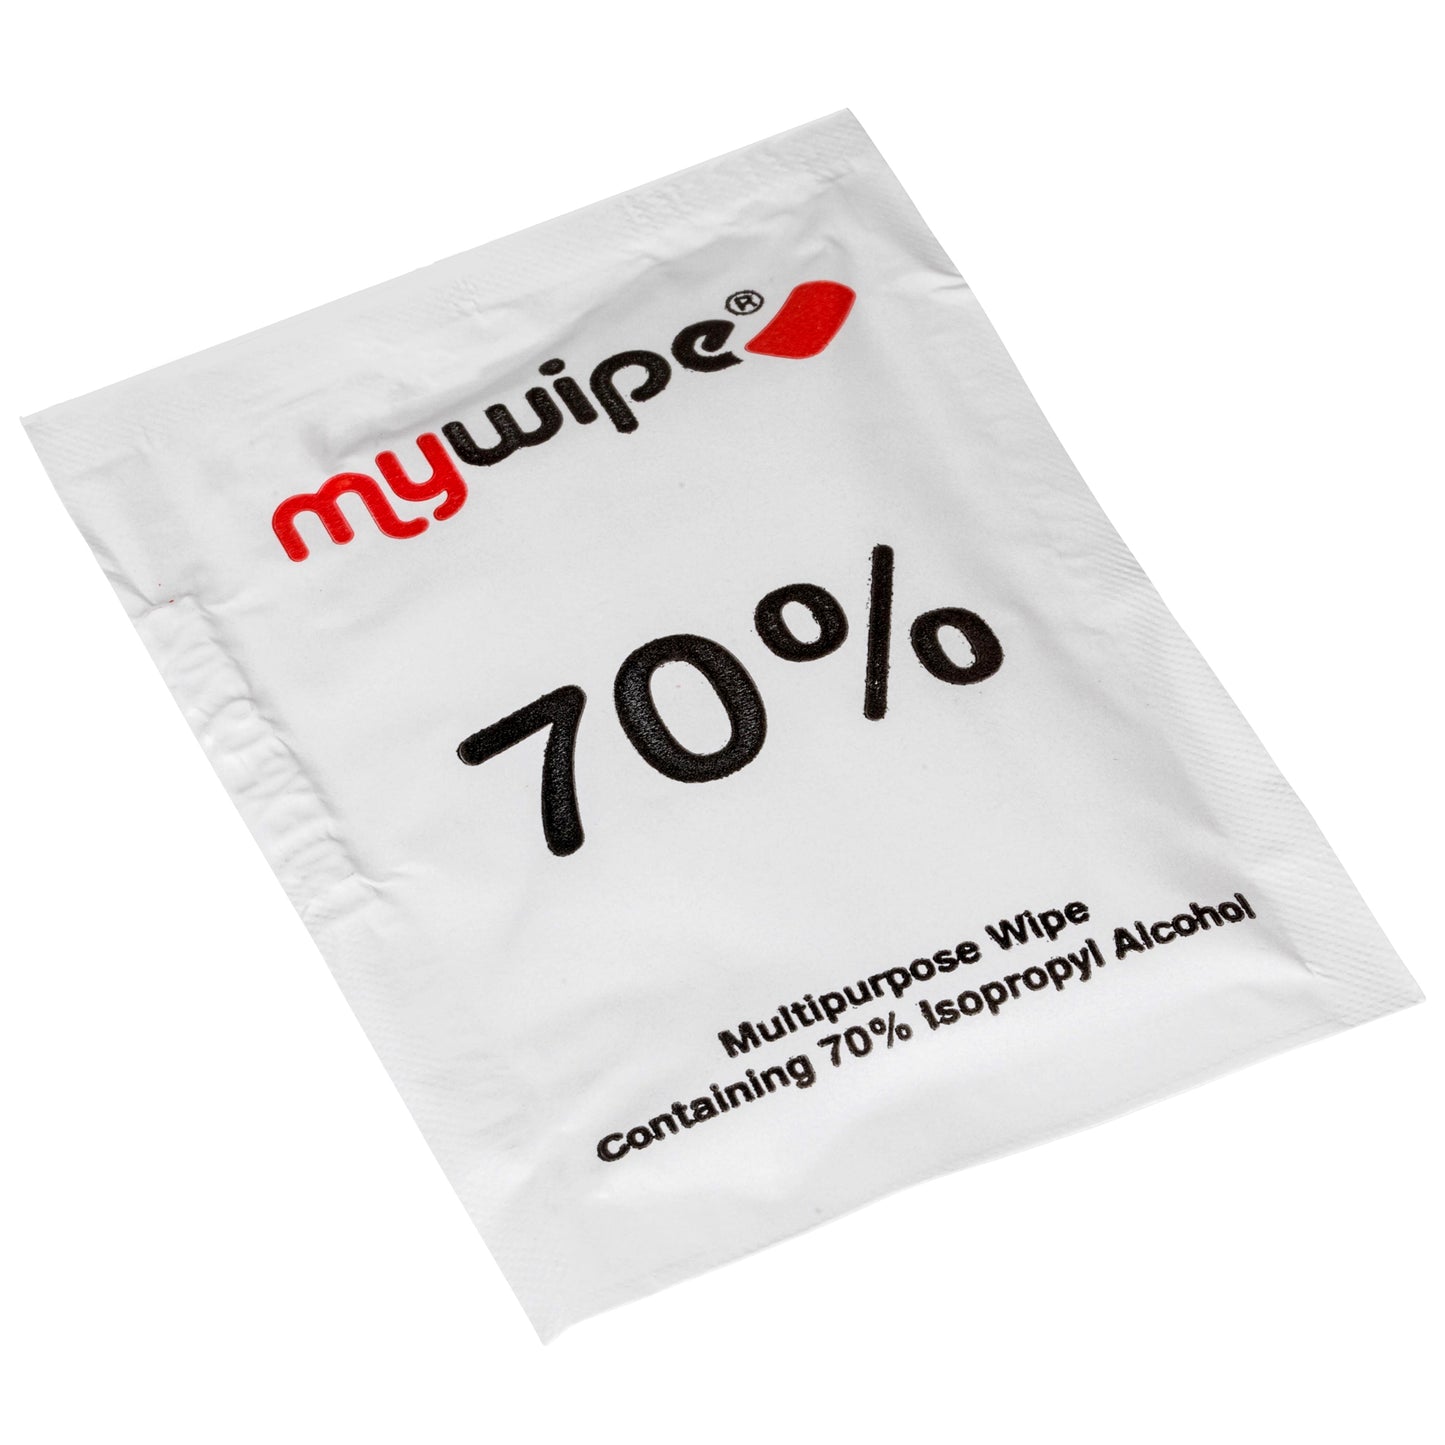 70% ALCOHOL WIPE SACHETS - PACK OF 20